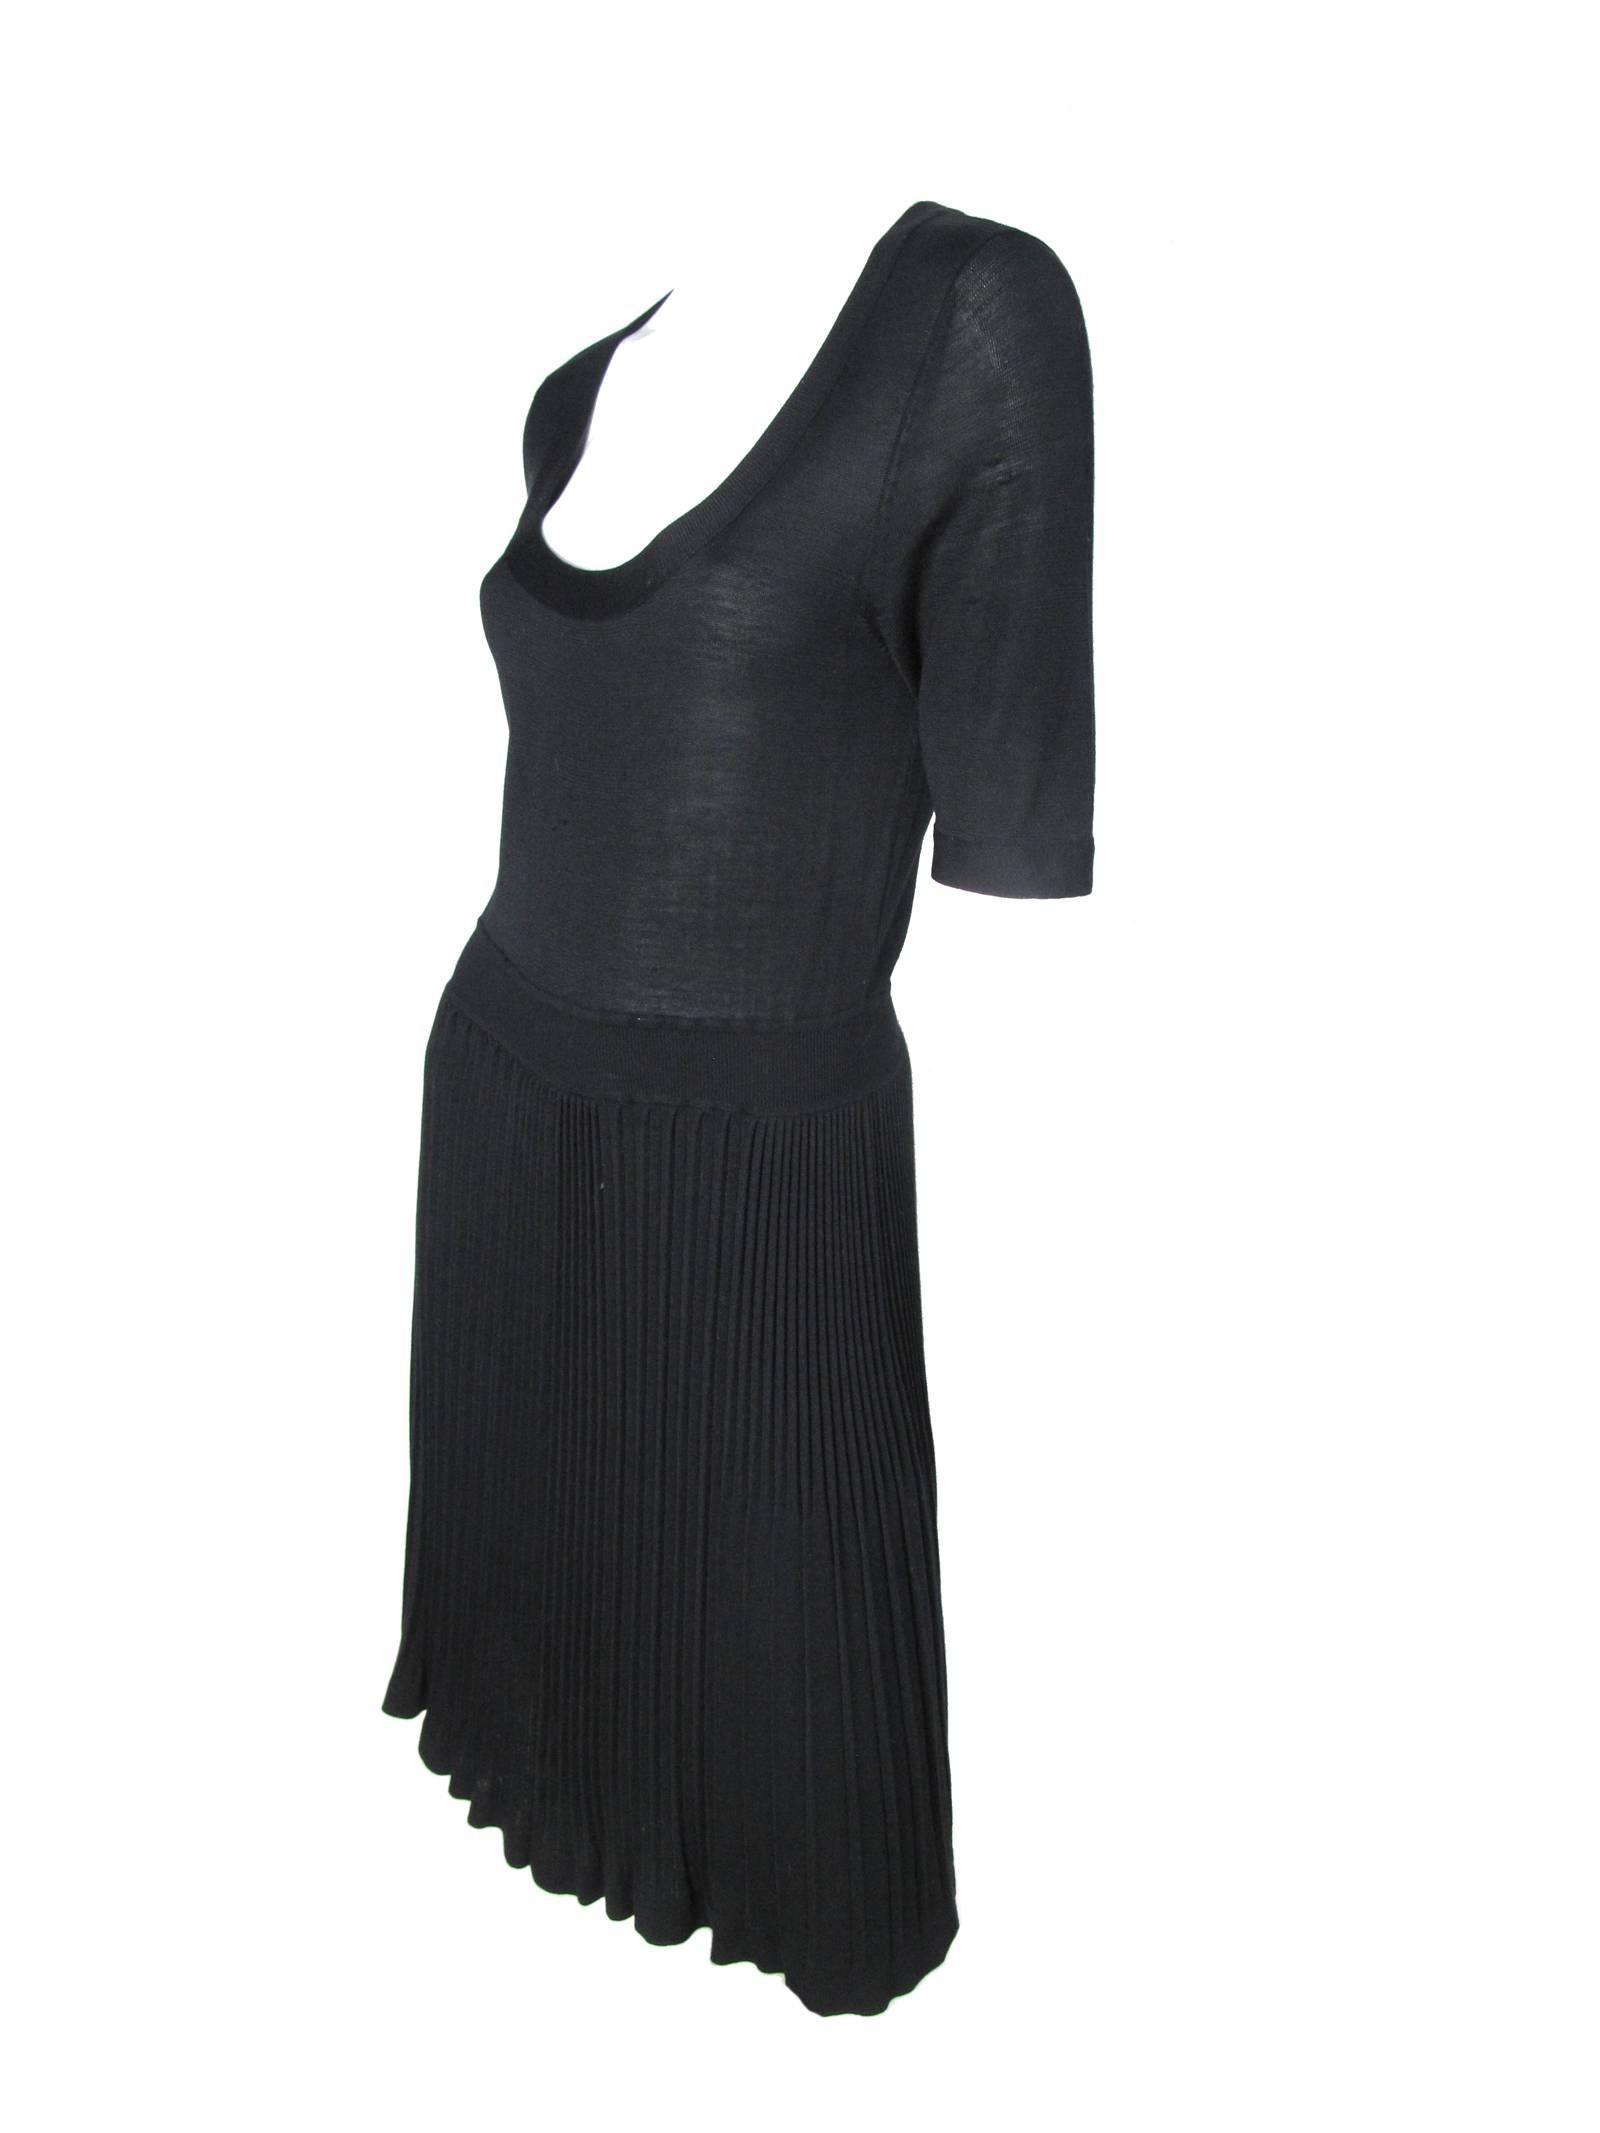 Black knit Balenciaga silk/ cashmere dress with pleating.  Condition: Good, some small pulls on front and sleeve.  Size 40/ US 6 

31